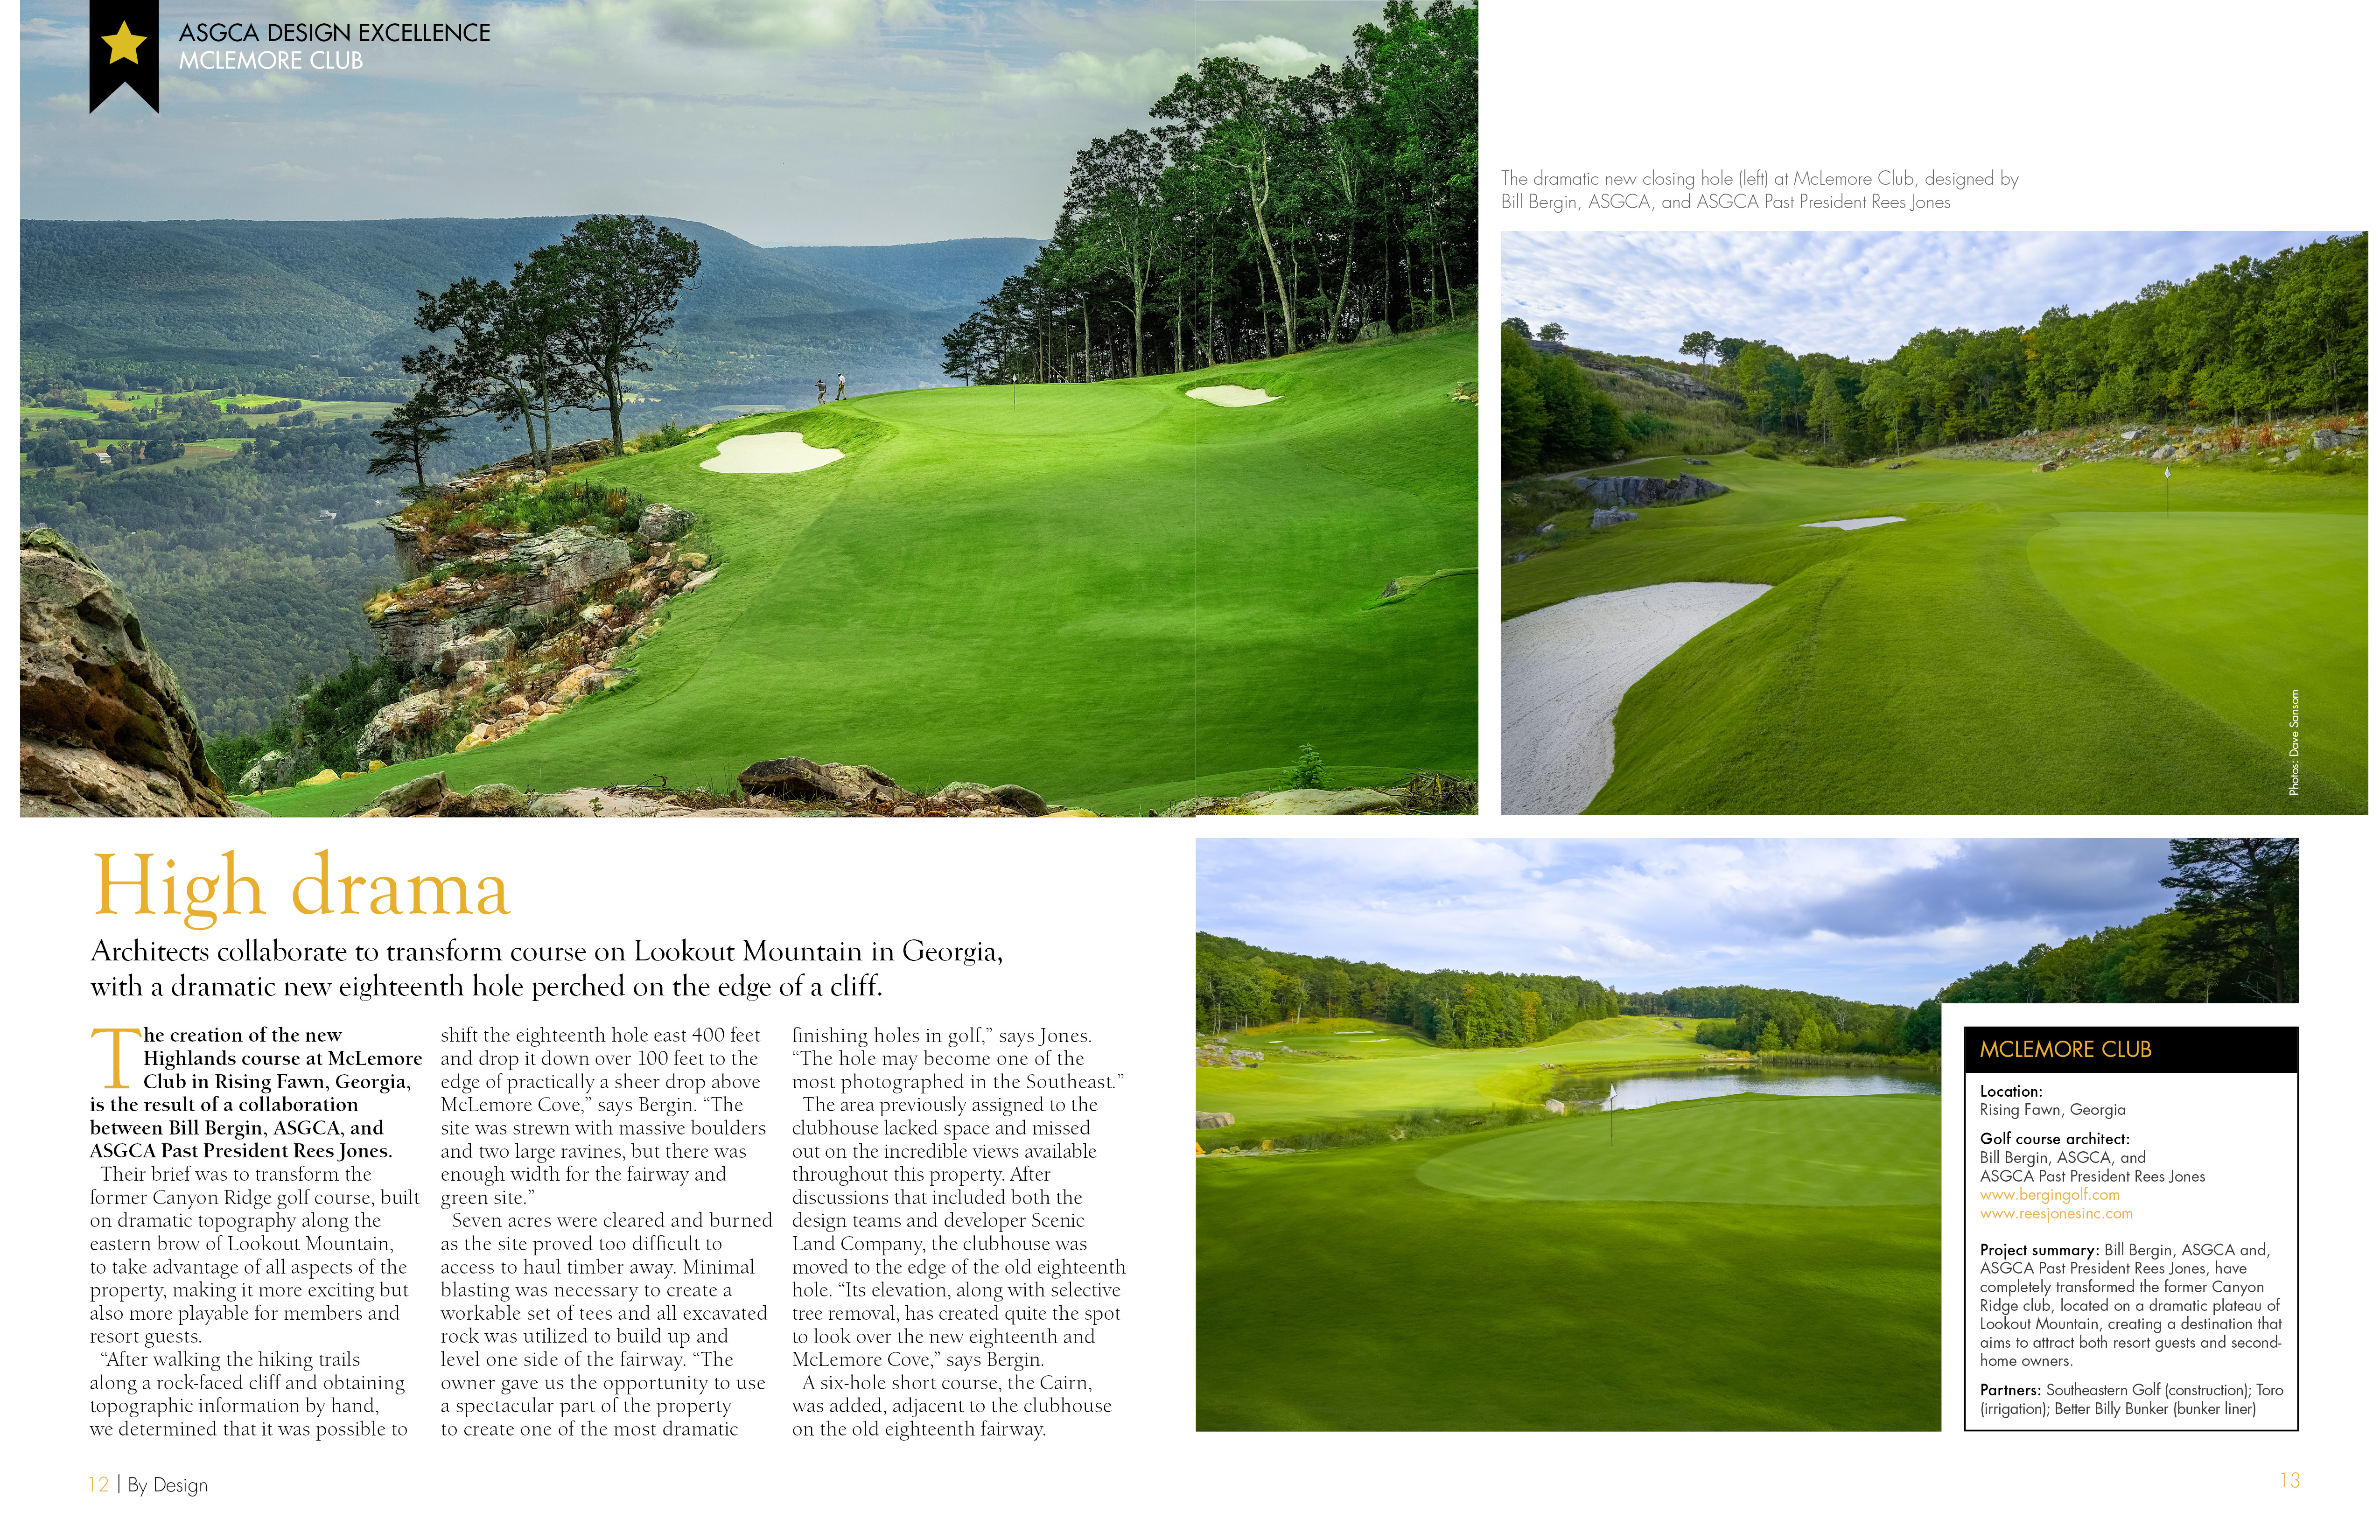 a magazine spread highlighting the eighteenth hole of a golf course that hangs off the edge of a cliff. Beyond that cliff are sweeping views of a lush green valley below.